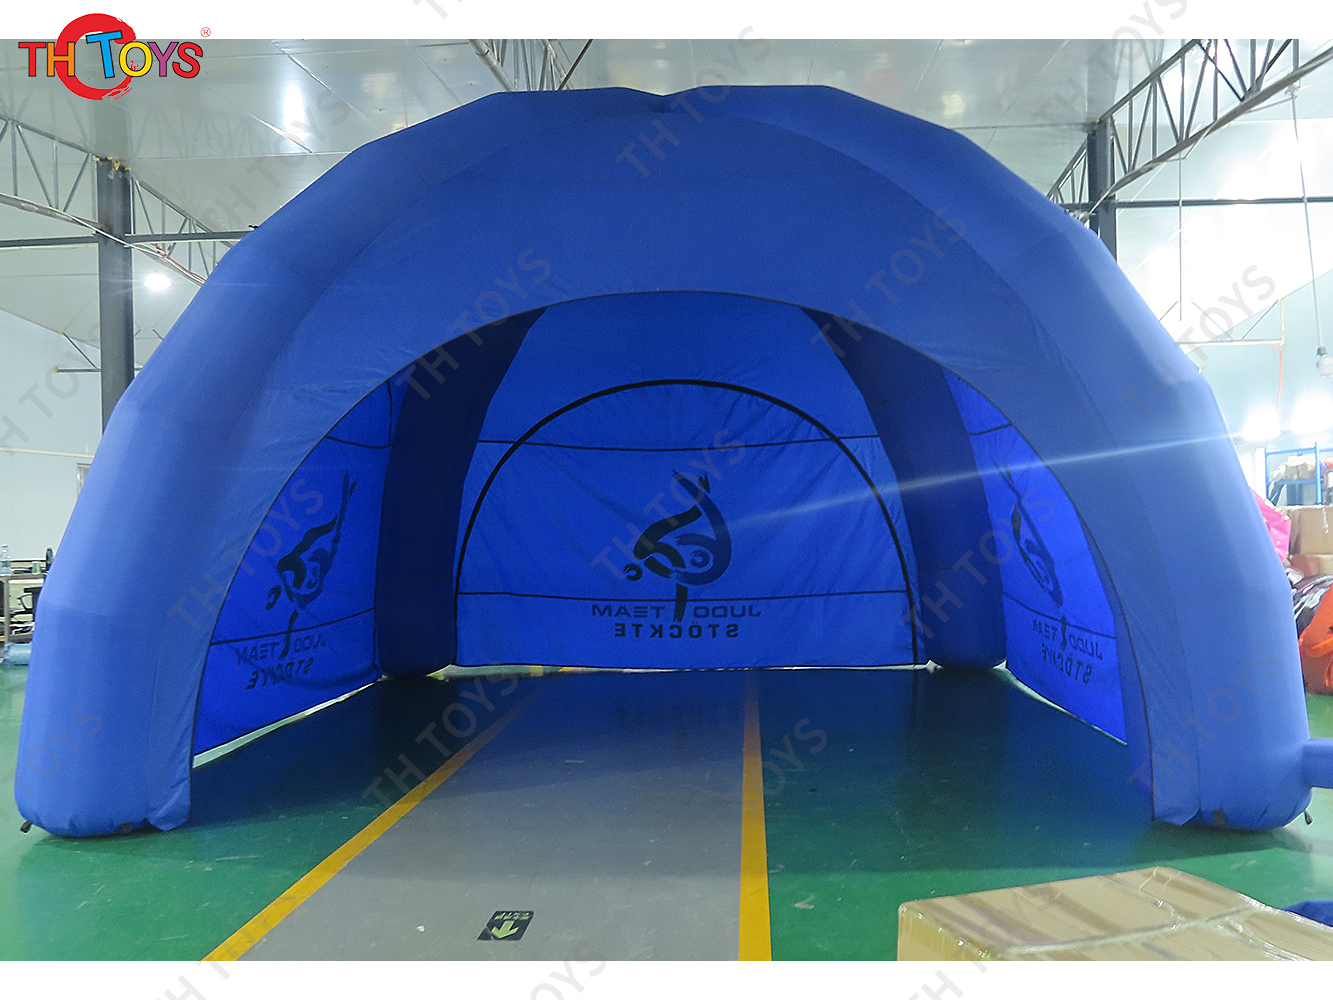 Grand inflatable tent, outdoor oxford portable air tent for camping